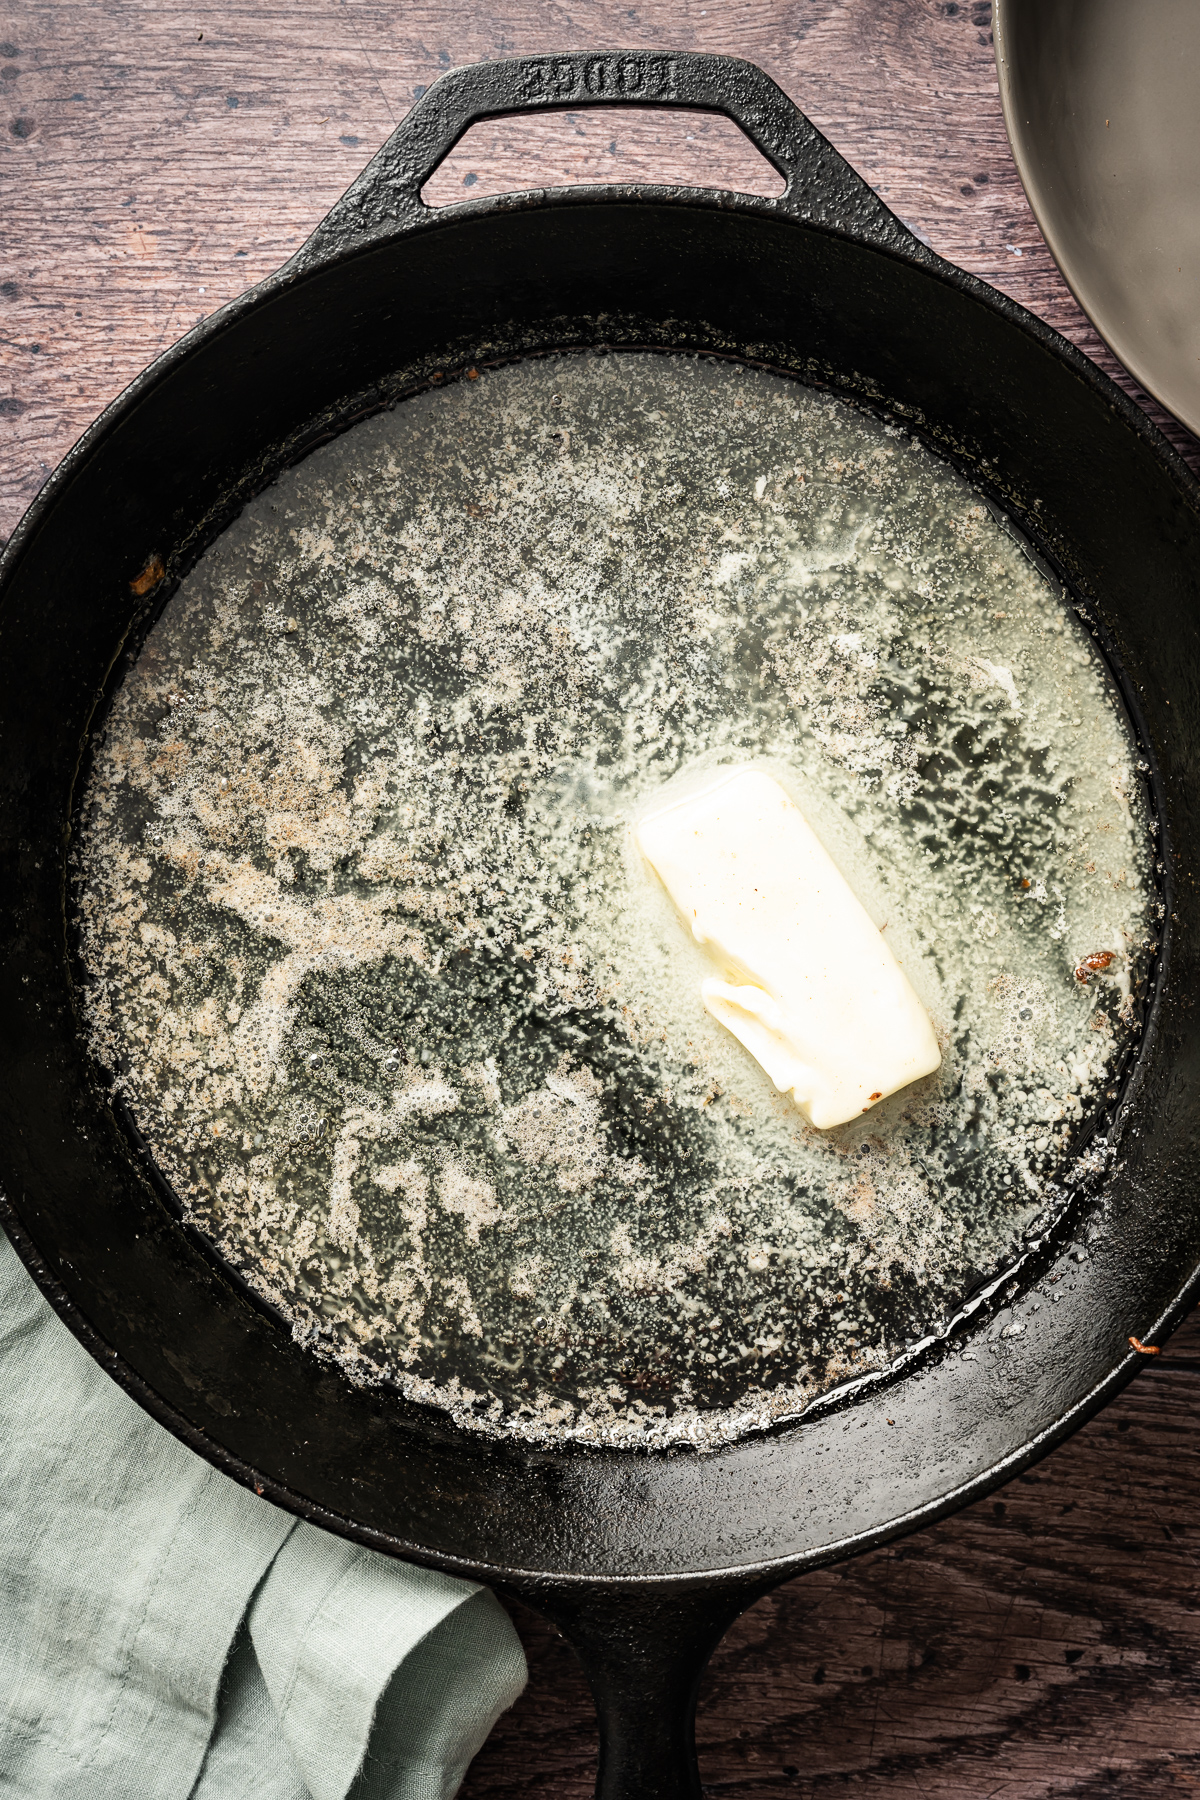 butter being melted in cast iron pan